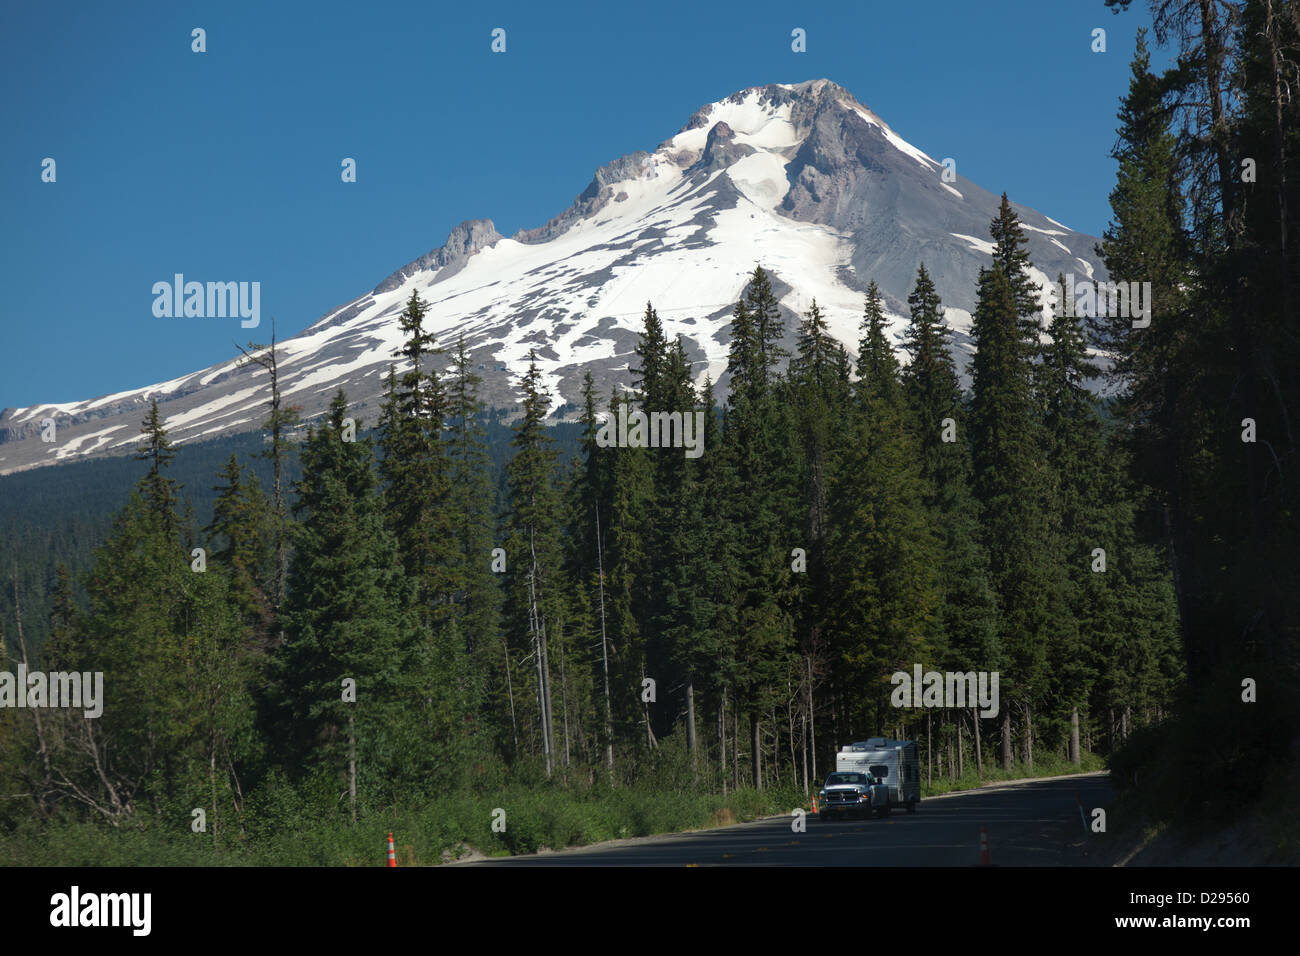 Caravan being towed on picturesque road near Government Camp, Oregon USA with beautiful senery including snowy mountains Stock Photo